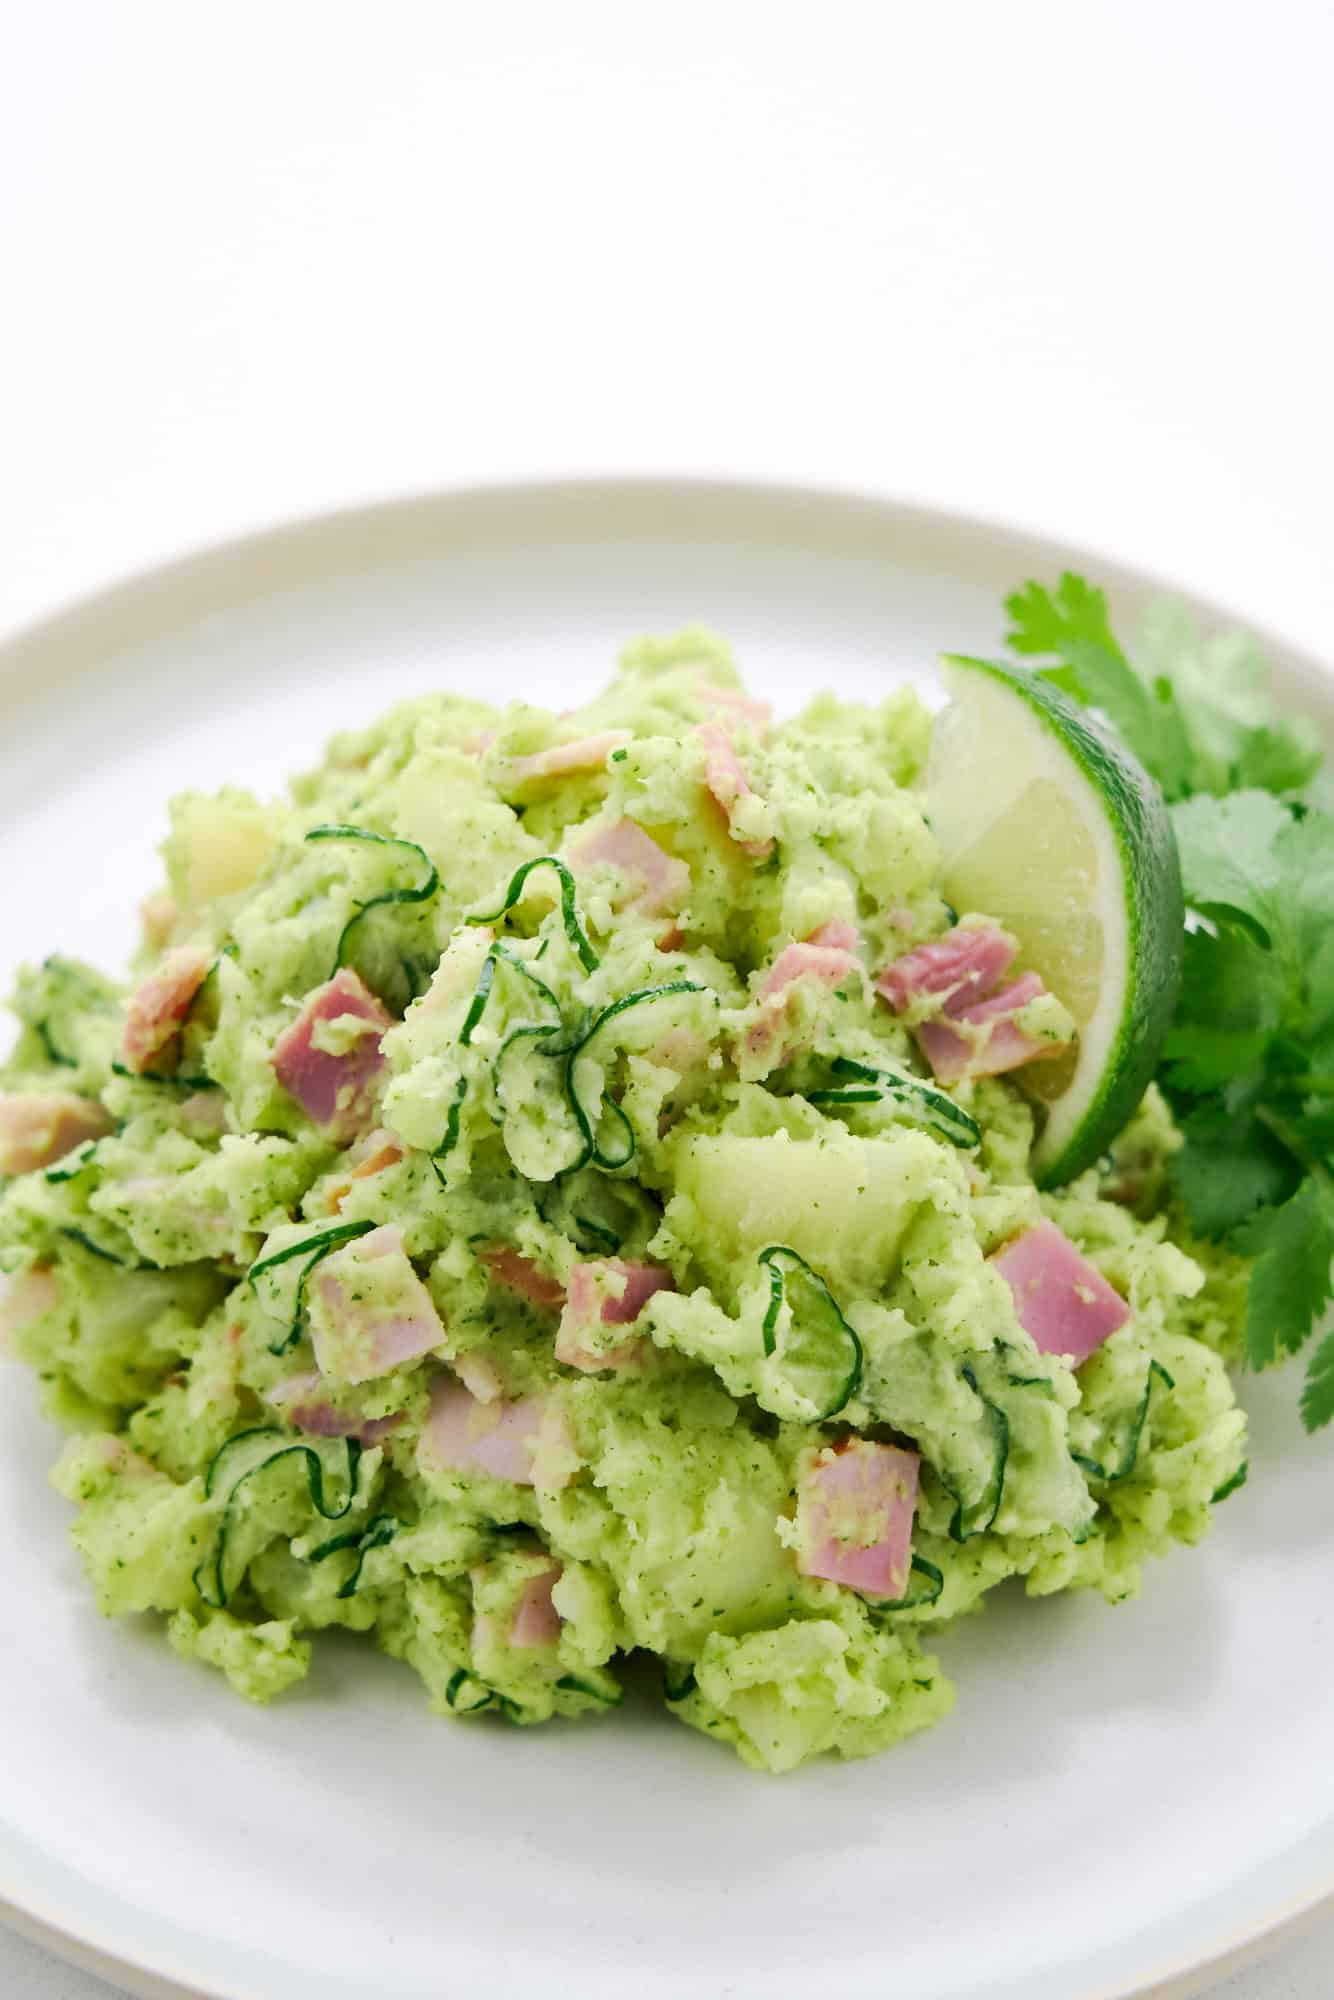 Potato salad with cilantro and a wedge of lime.